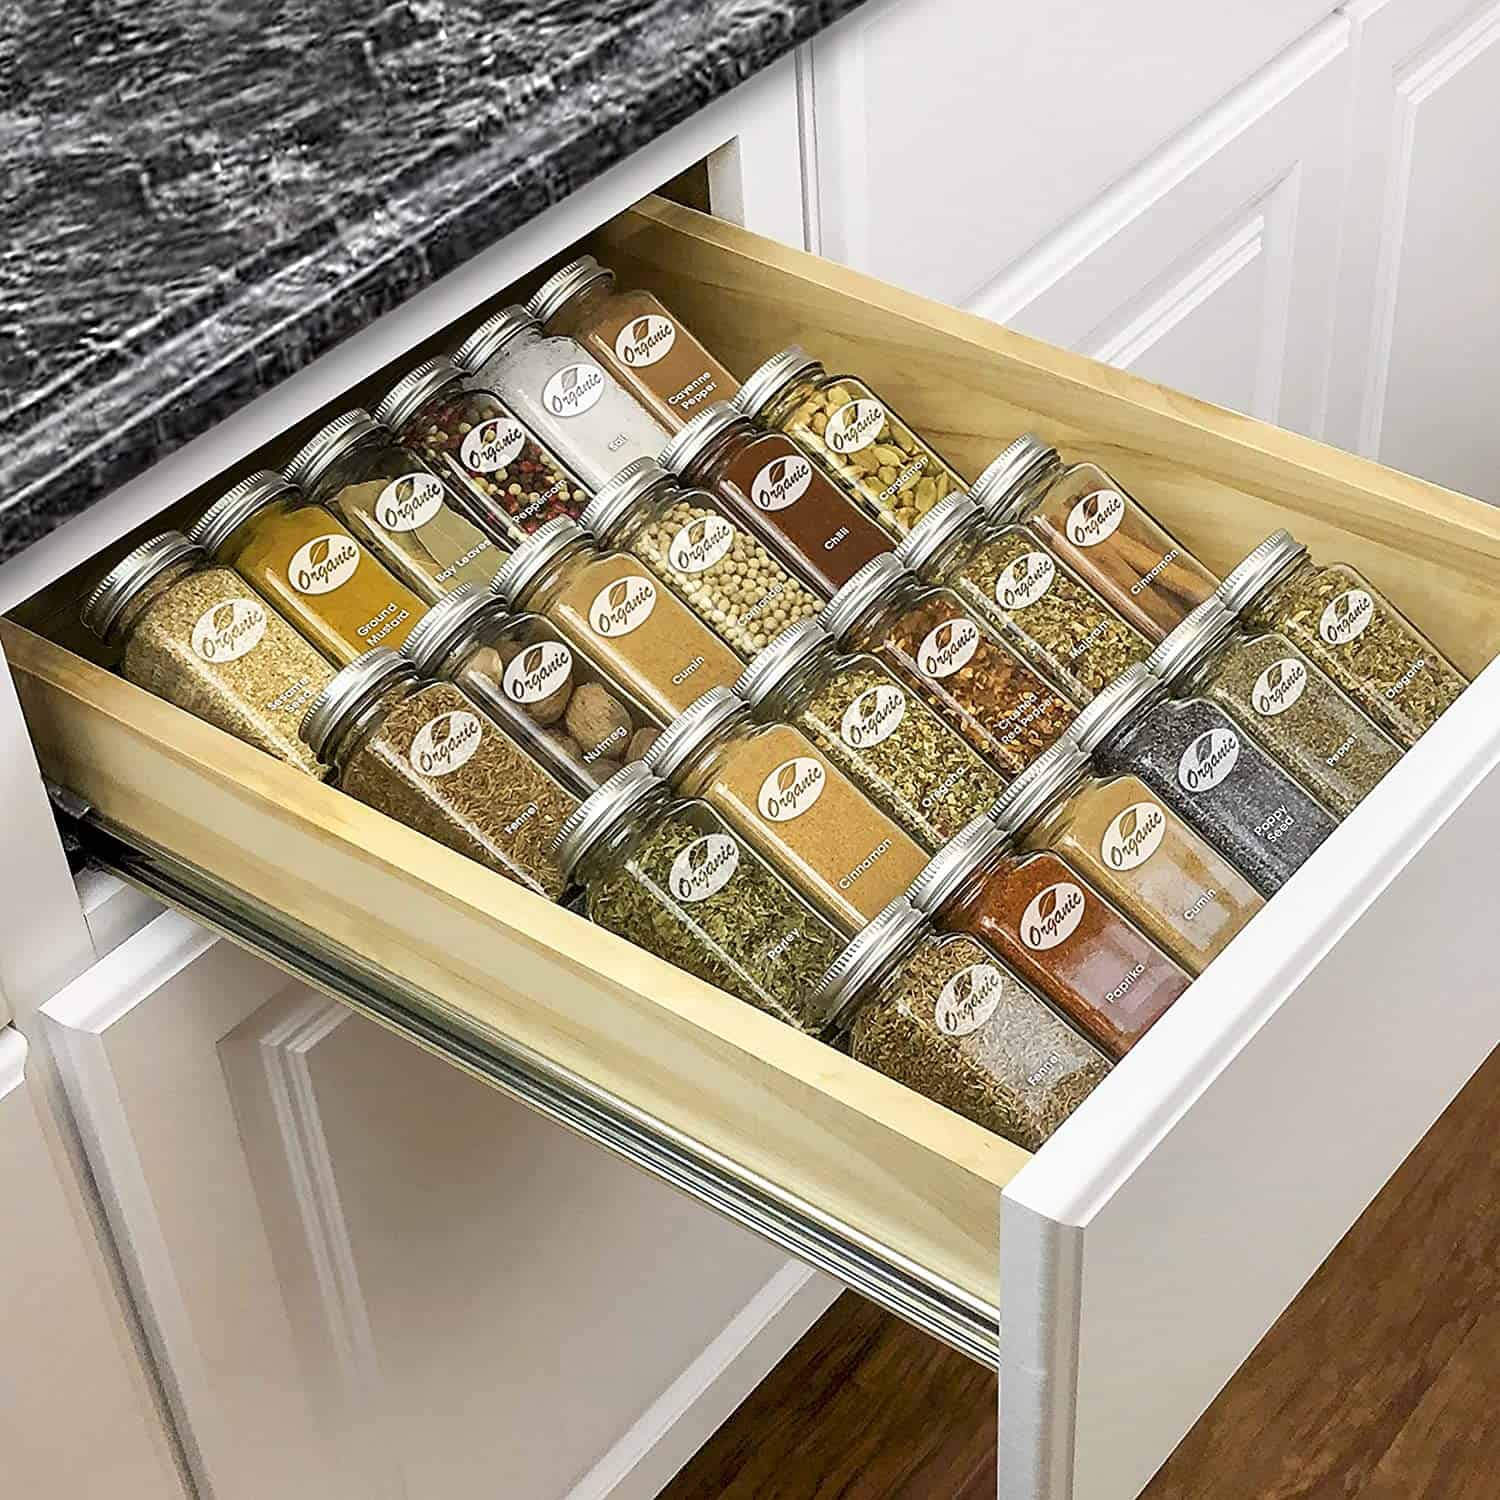 Four-tier in-drawer spice rack tray with organized spices.